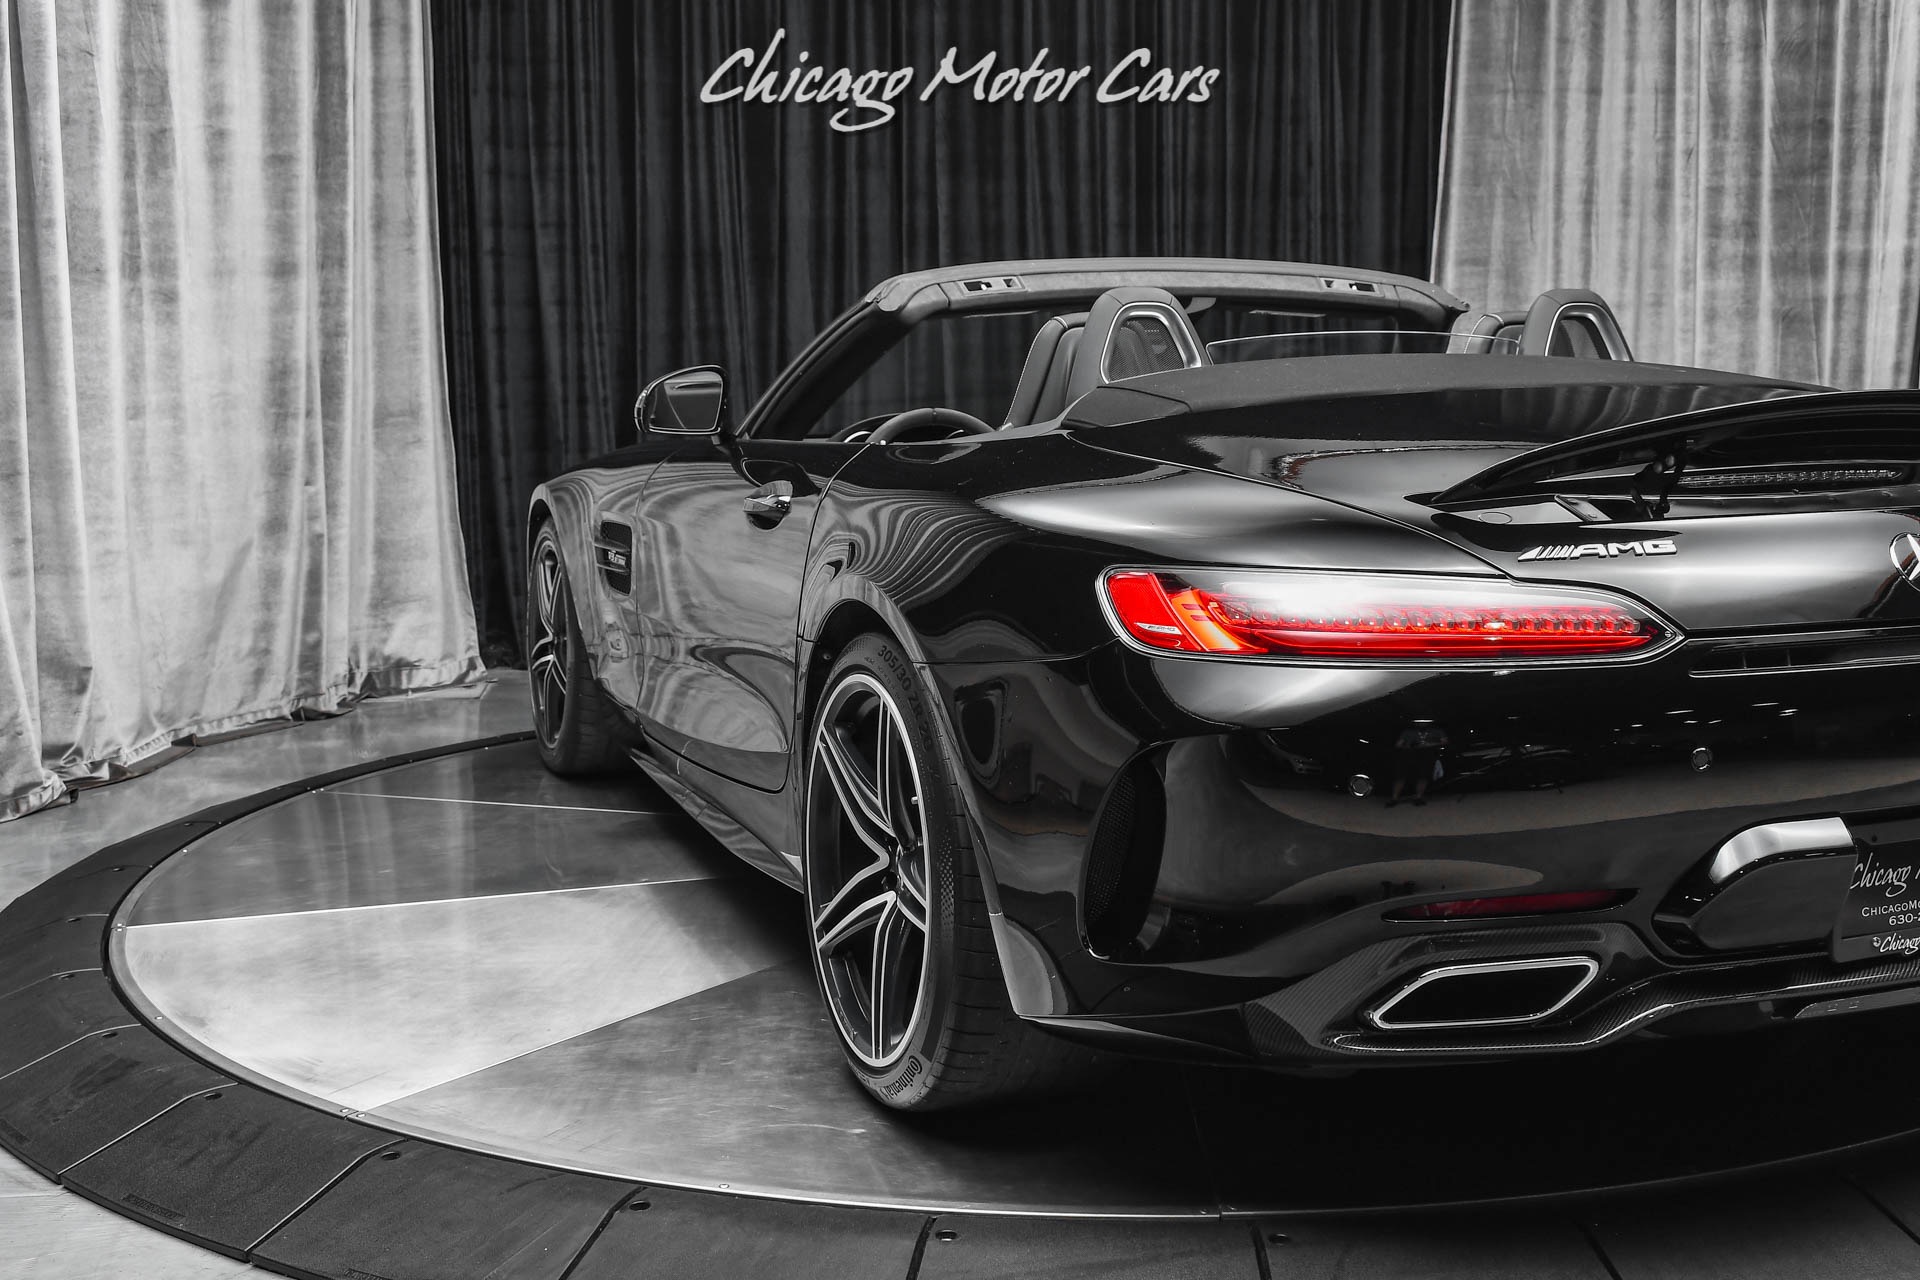 Used-2018-Mercedes-Benz-AMG-GT-C-Roadster-MSRP-180795-LOADED-with-Every-Option-Carbon-Ceramic-Brakes